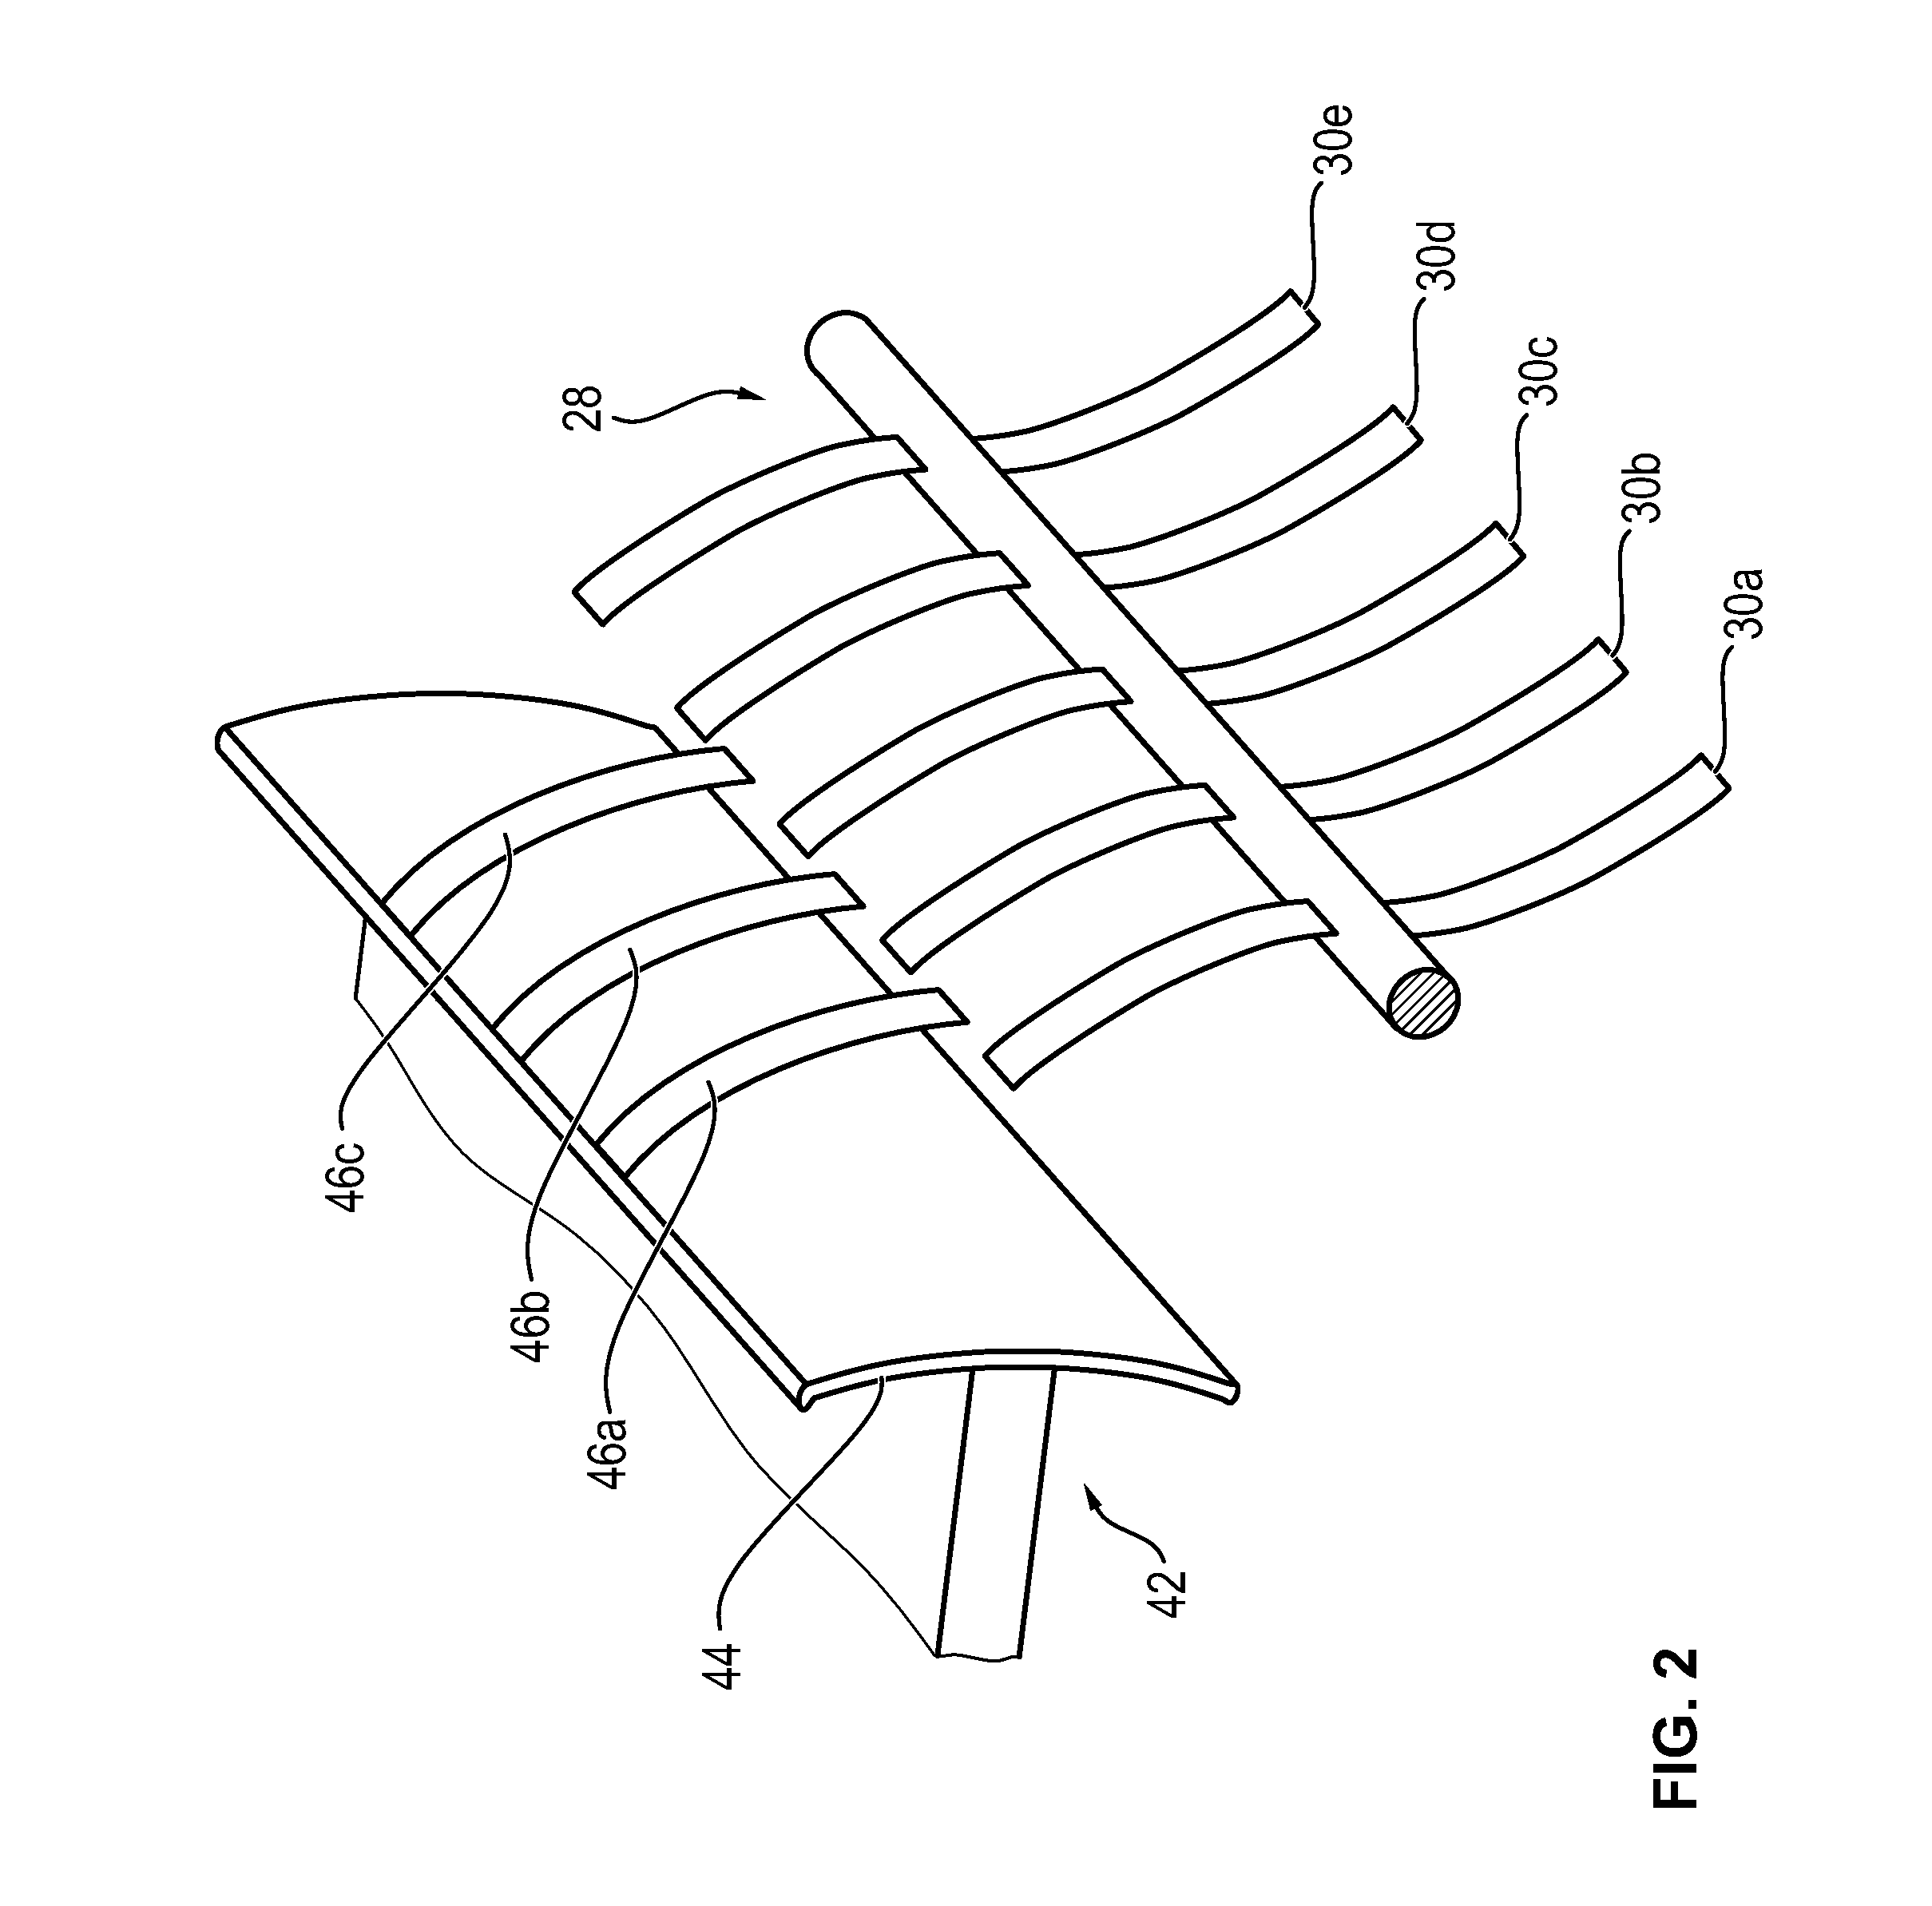 Device and method for filling a flexible transport container with notes of value